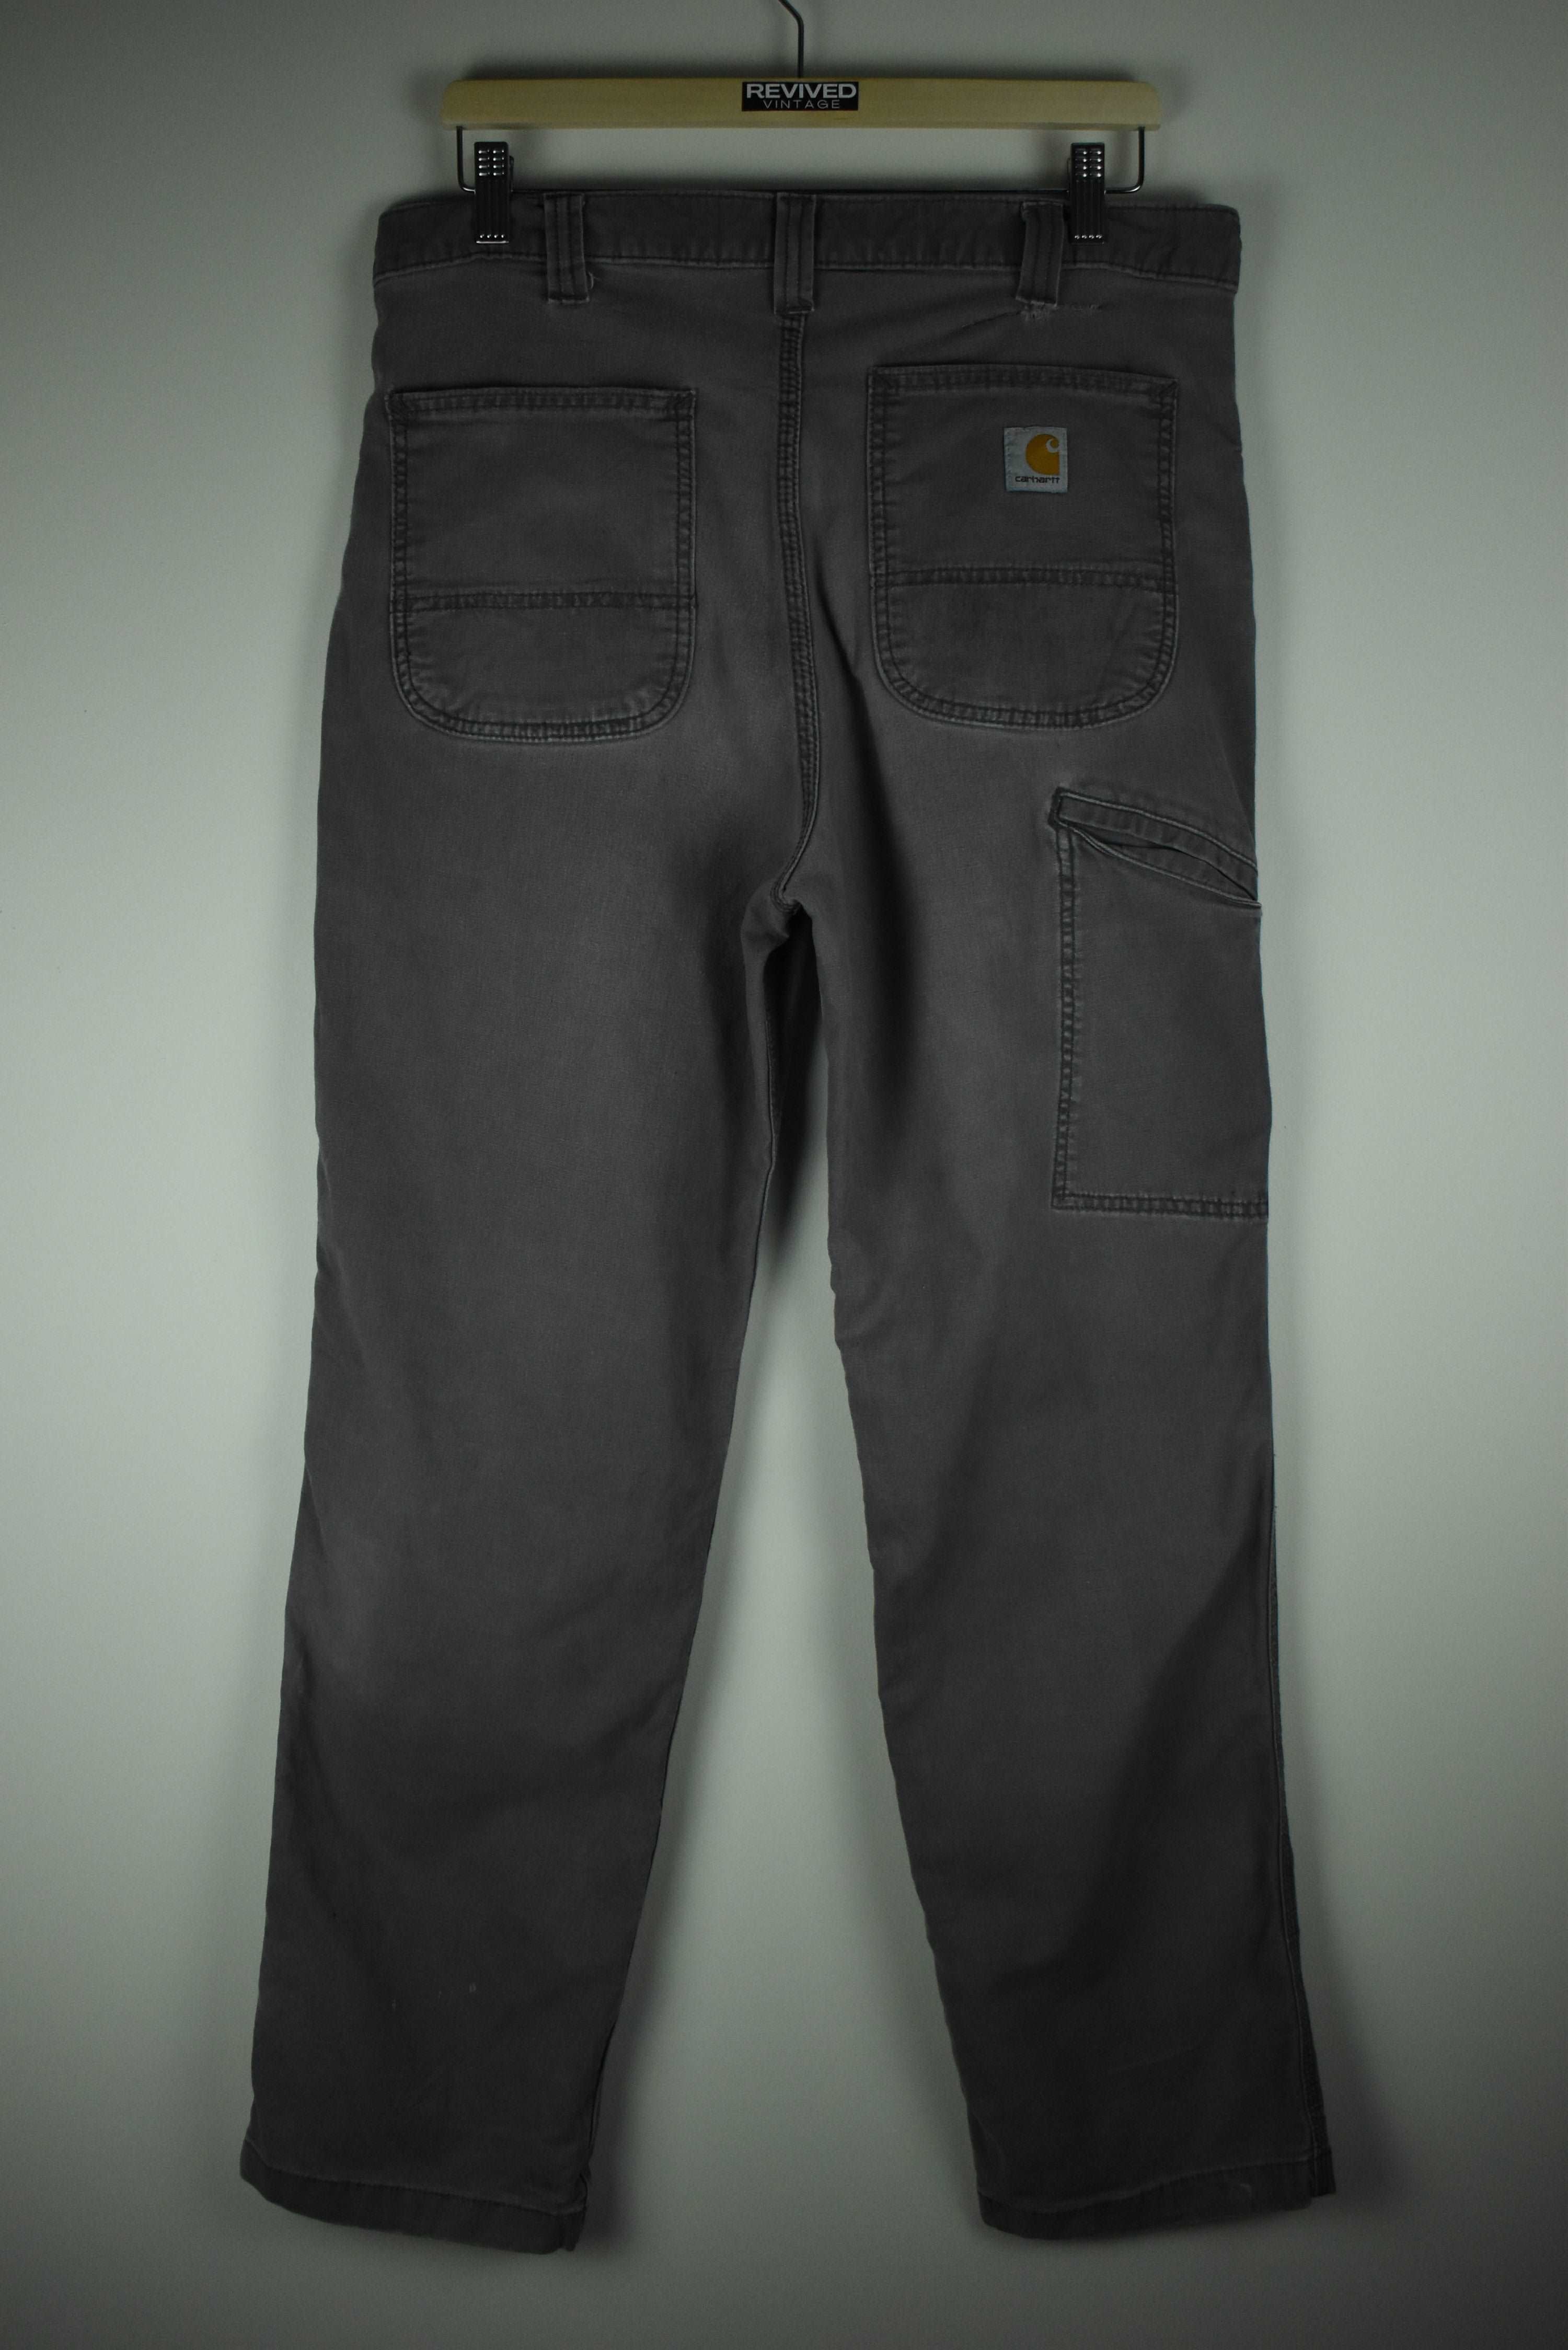 Vintage Carhartt Pants Relaxed Fit 34 x 32